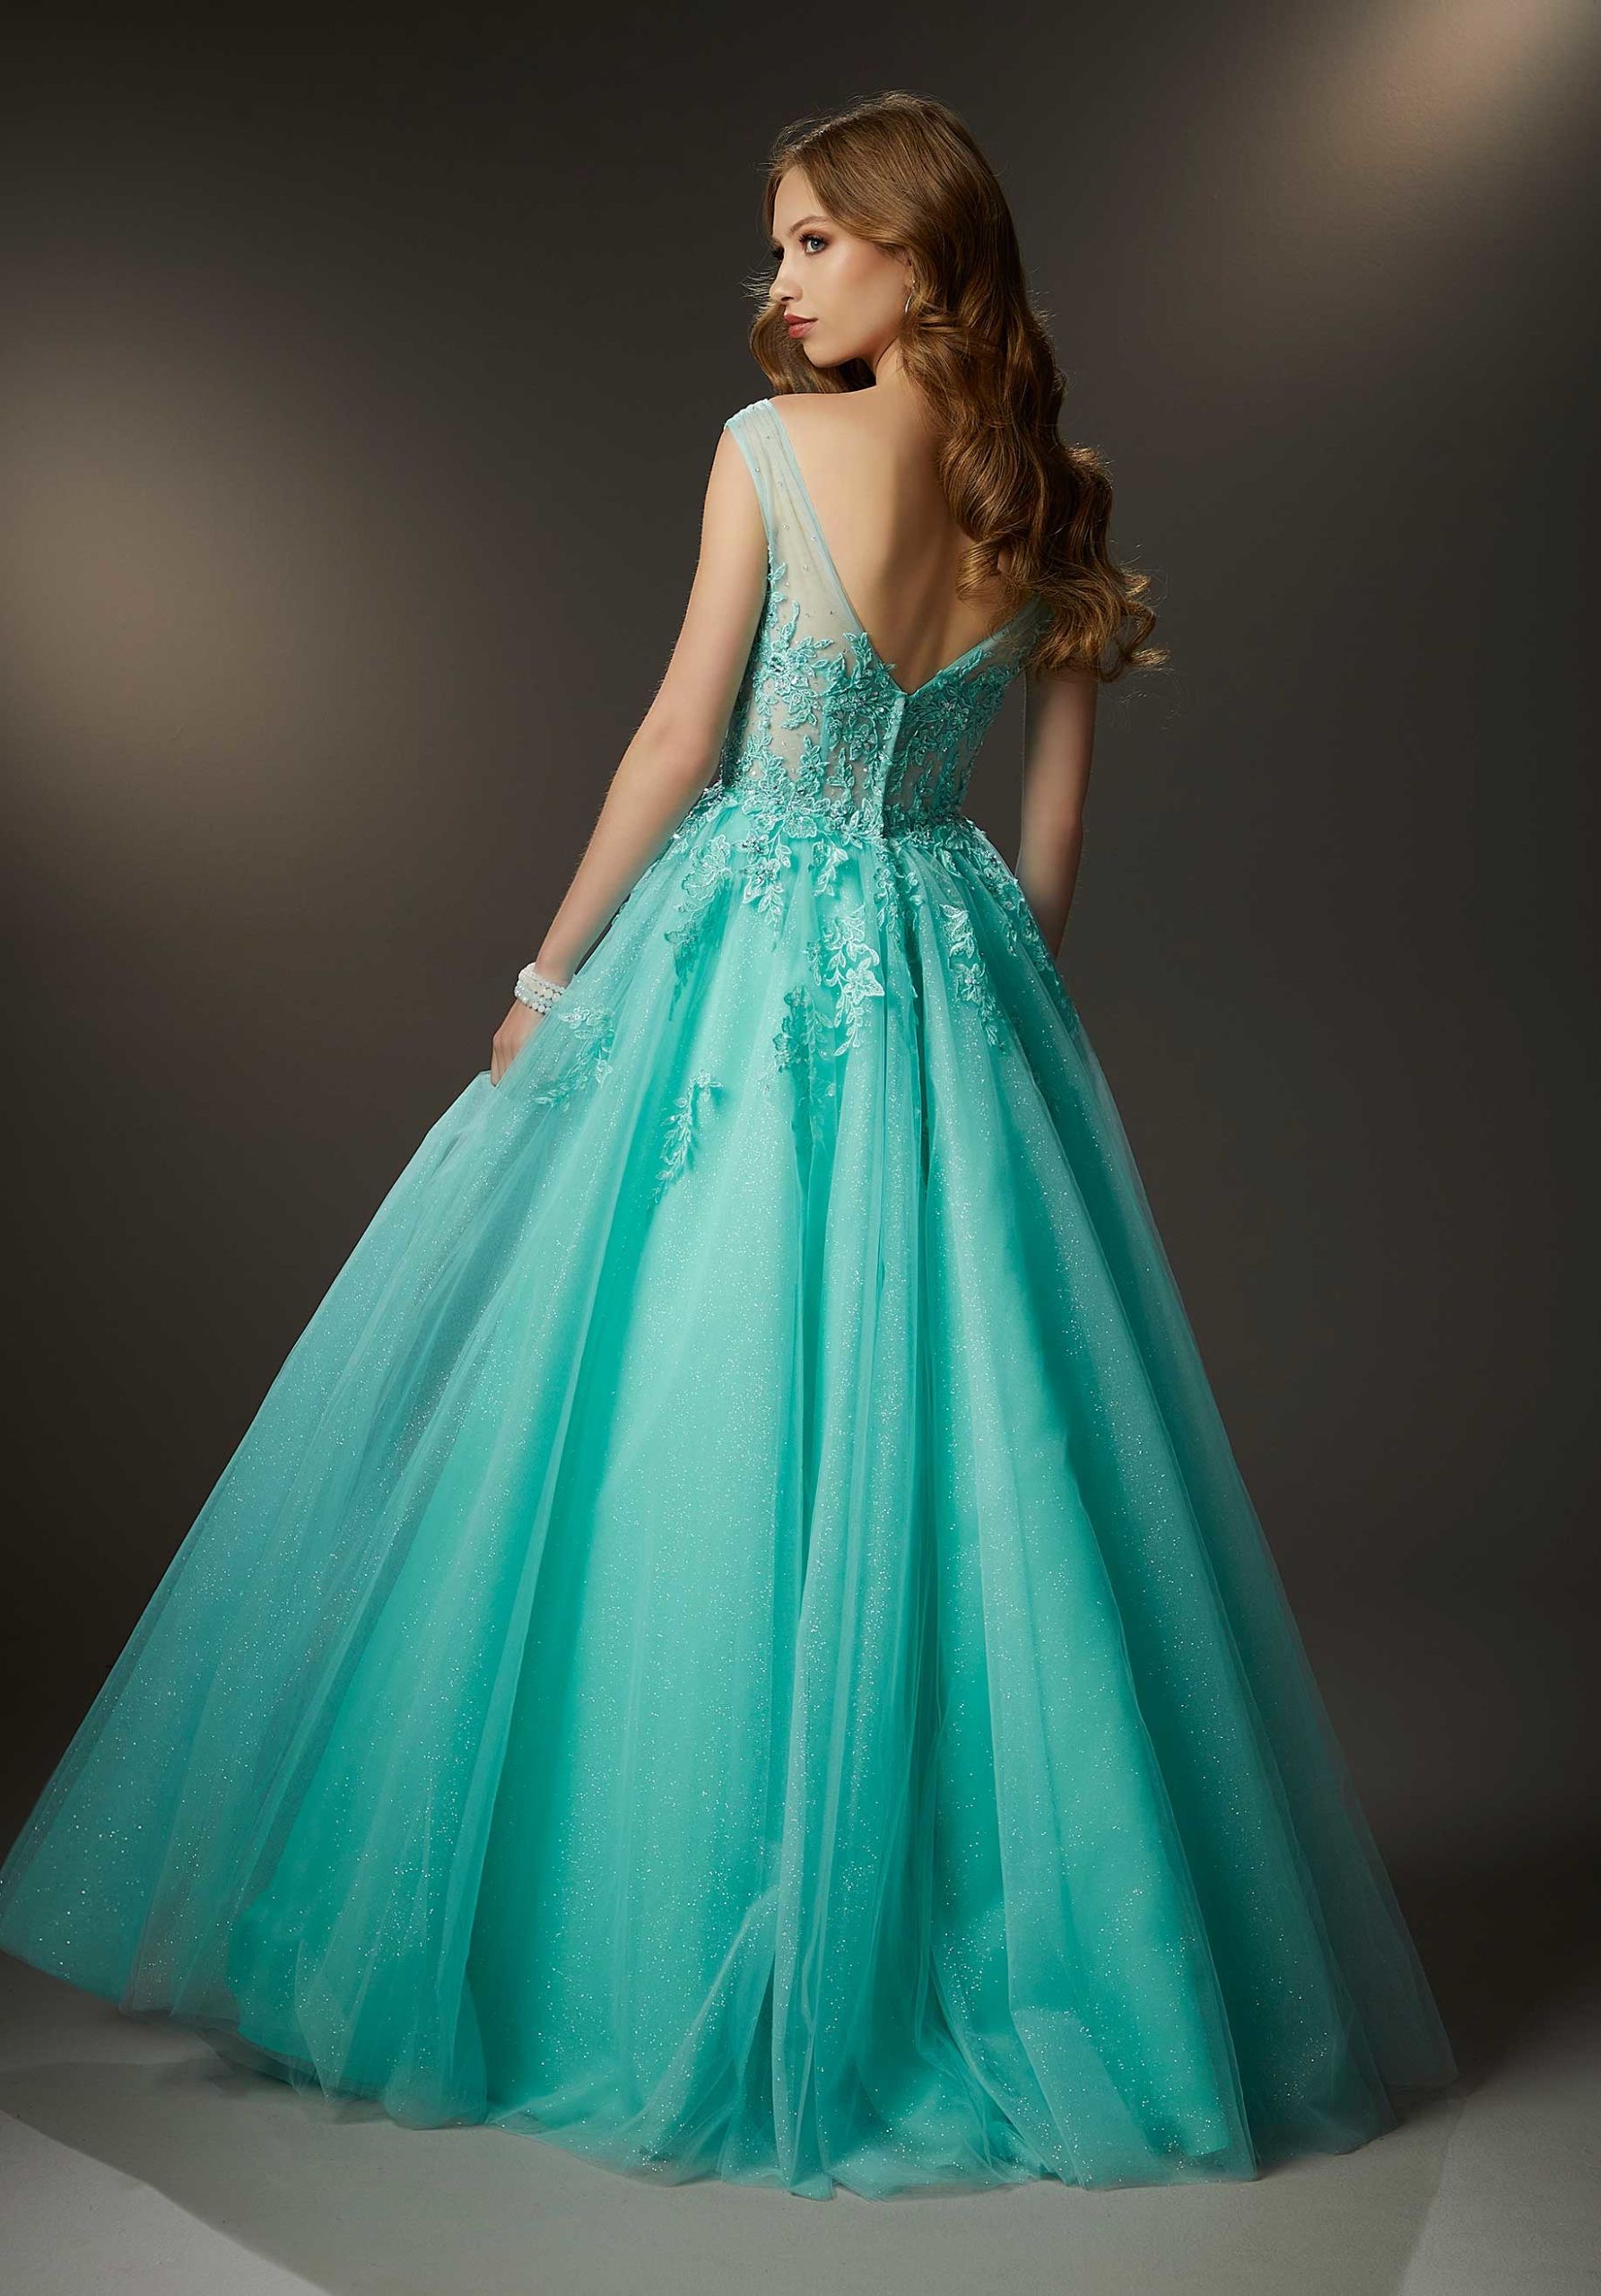 Nice Evening Dresses Turquoise Prom Dress,Ball Gowns Prom Dress,lace dress,long  party dress… | Elegant prom dresses, Prom dresses sleeveless, Turquoise  prom dresses